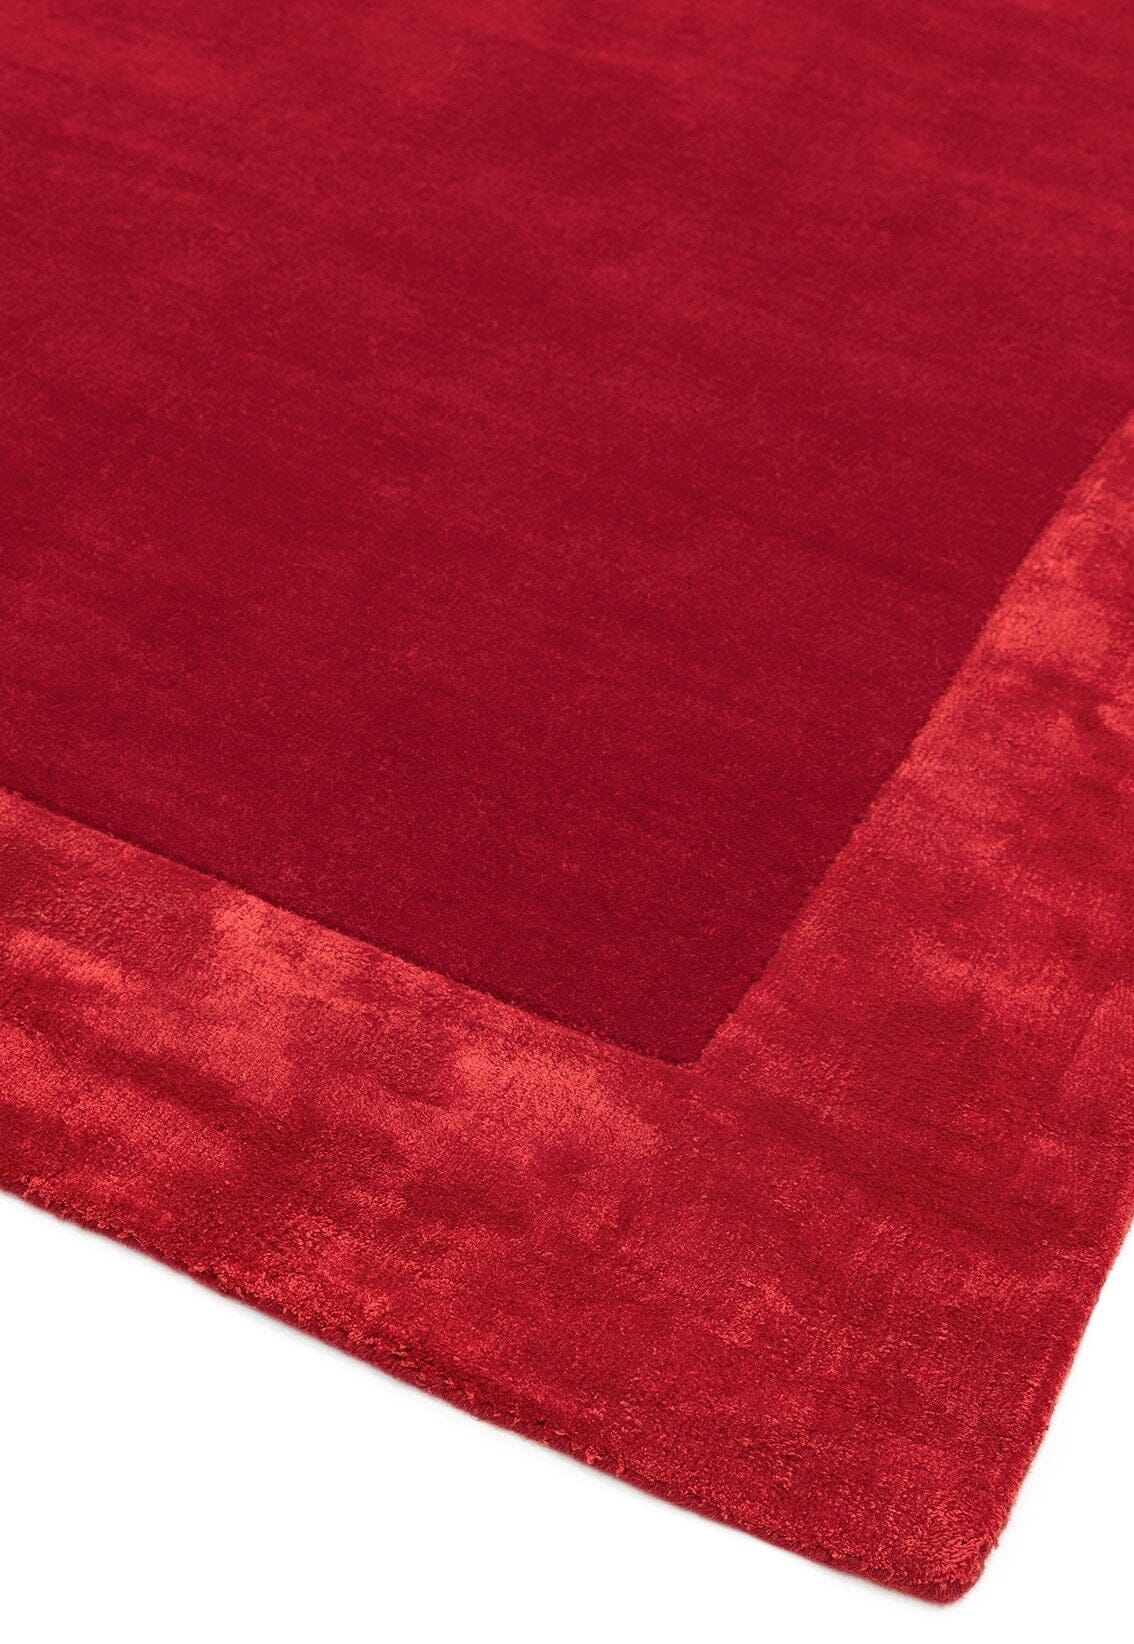 Asiatic Carpets Ascot Hand Woven Rug Red - 80 x 150cm